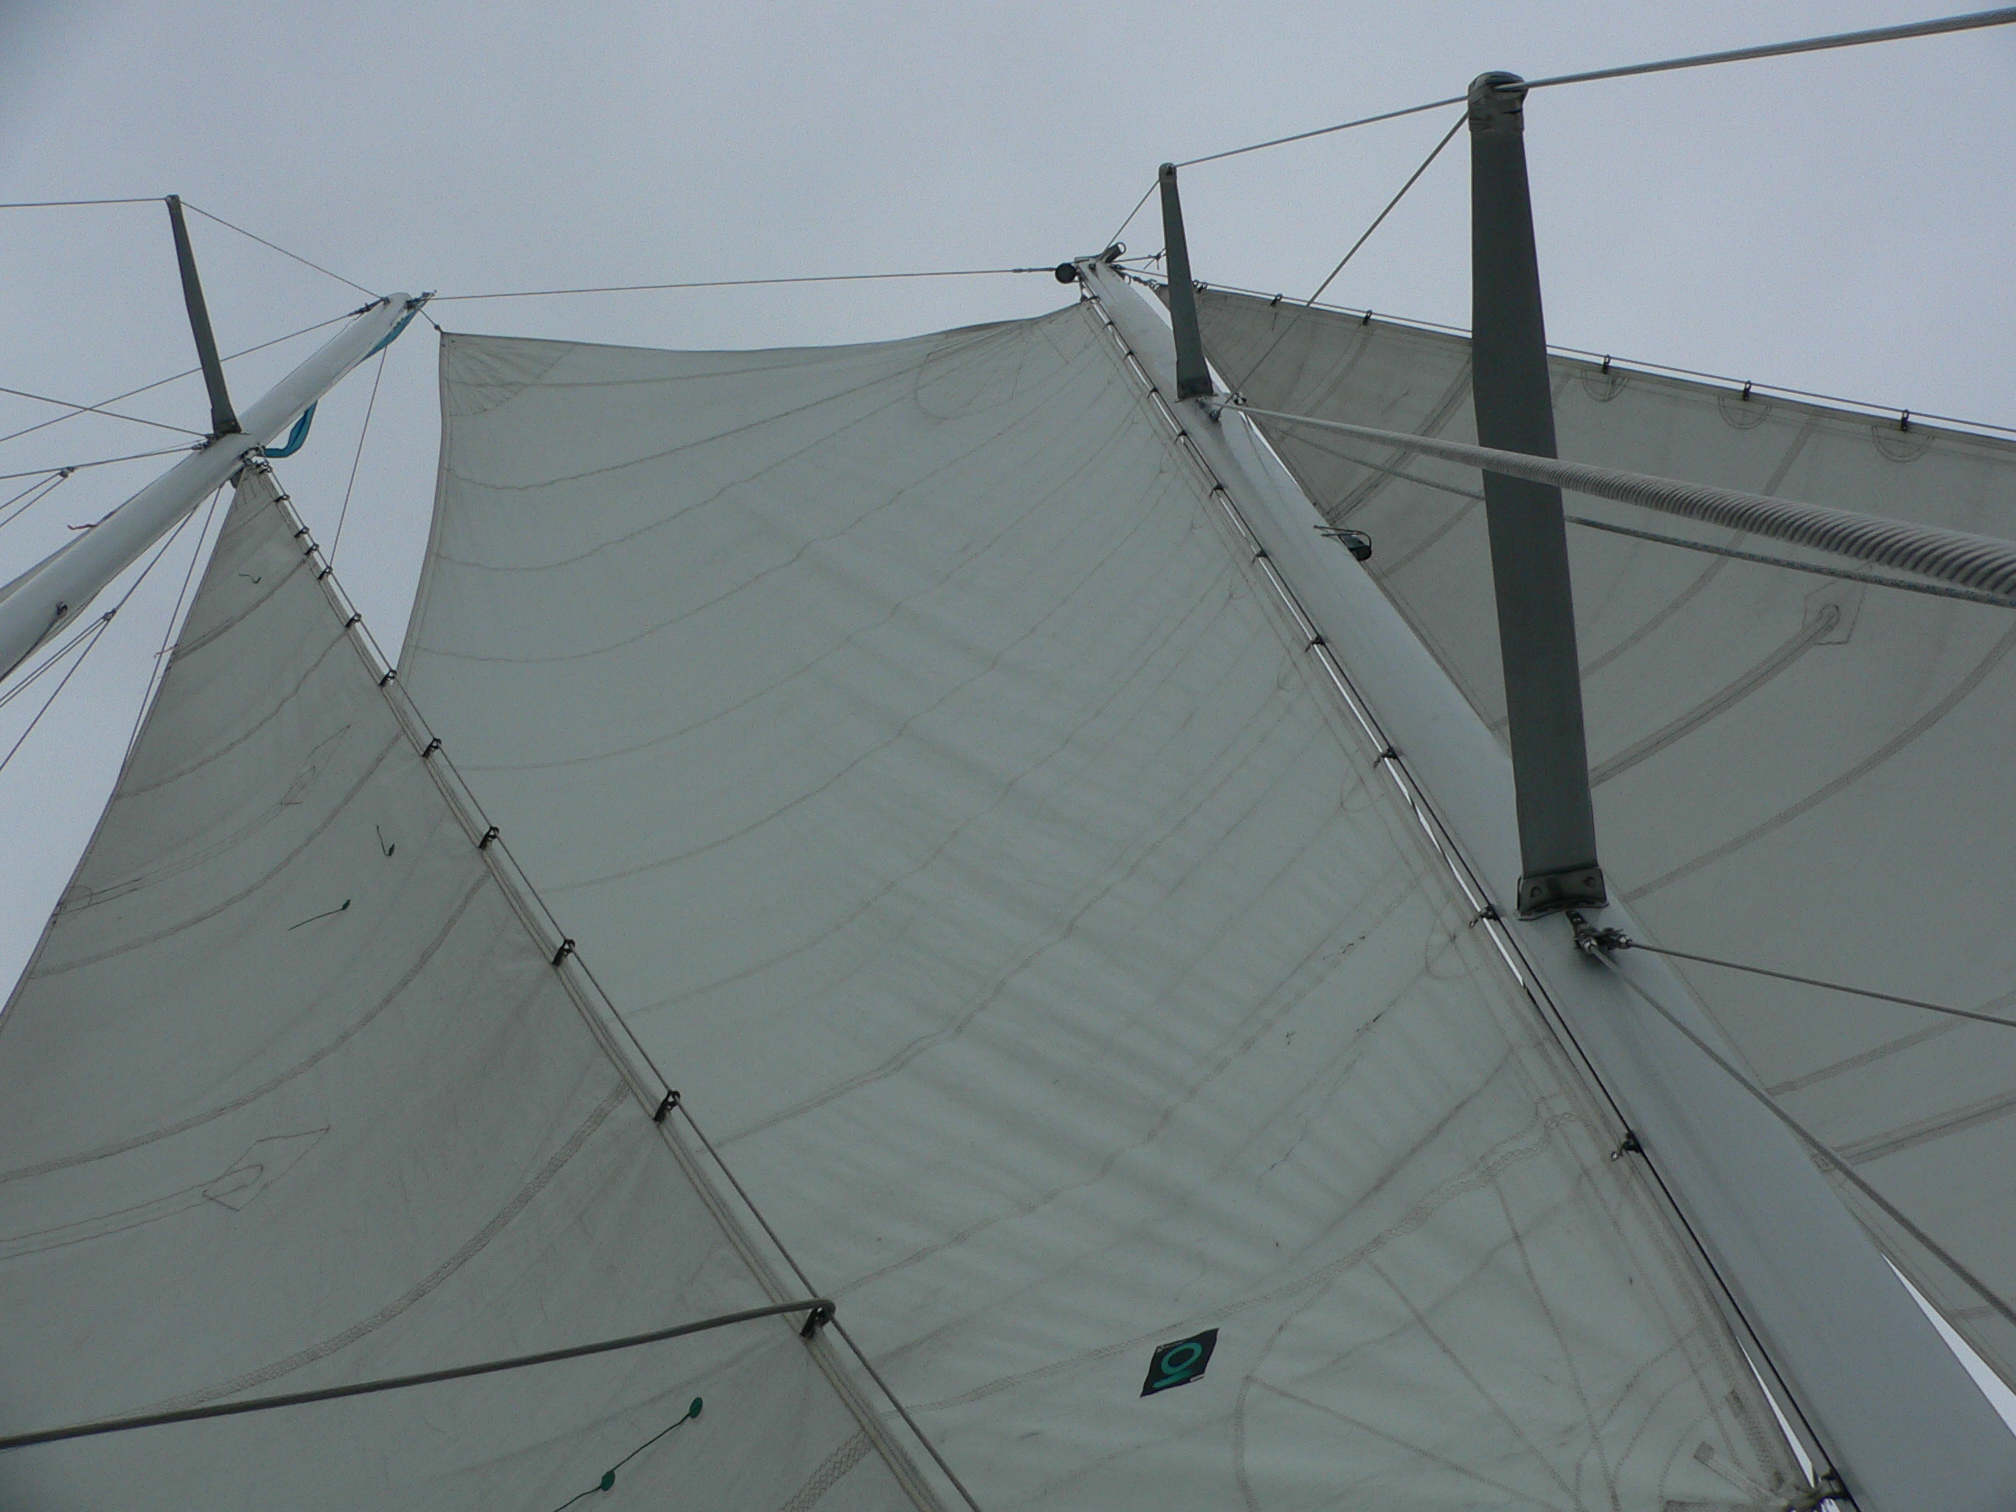 Sails on a cloudy day